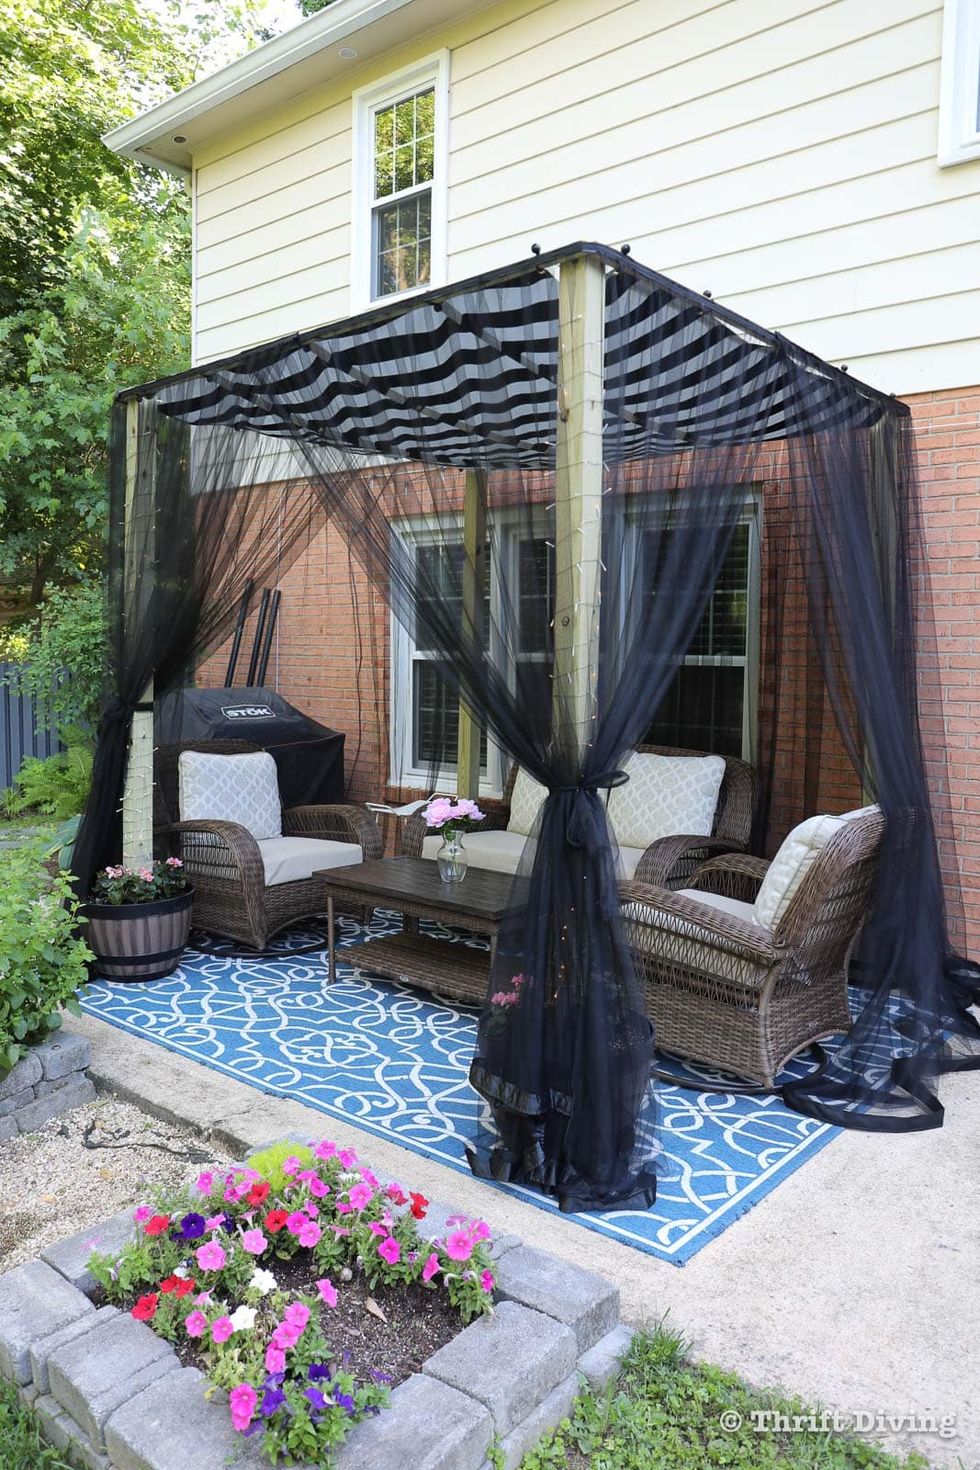 https://hips.hearstapps.com/hmg-prod/images/patio-cover-ideas-shade-canopy-with-mosquito-netting-64345a76c9655.jpg?crop=1.00xw:1.00xh;0,0&resize=980:*